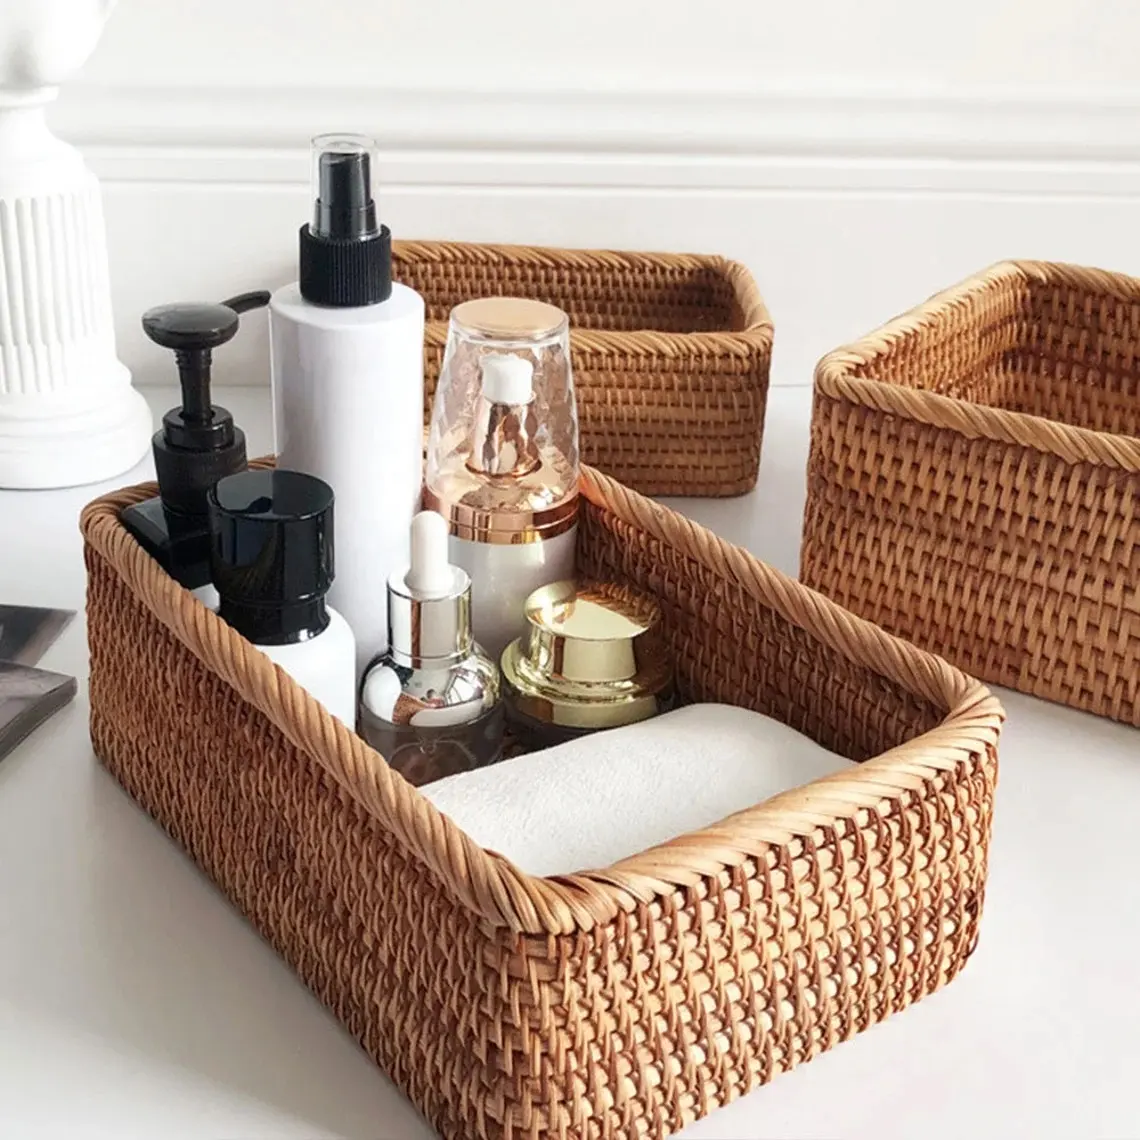 BATHROOM PRODUCTS rectangle storage box woven baskets rattan boxes wooden laundry towel bottle clothes organizer accessories set